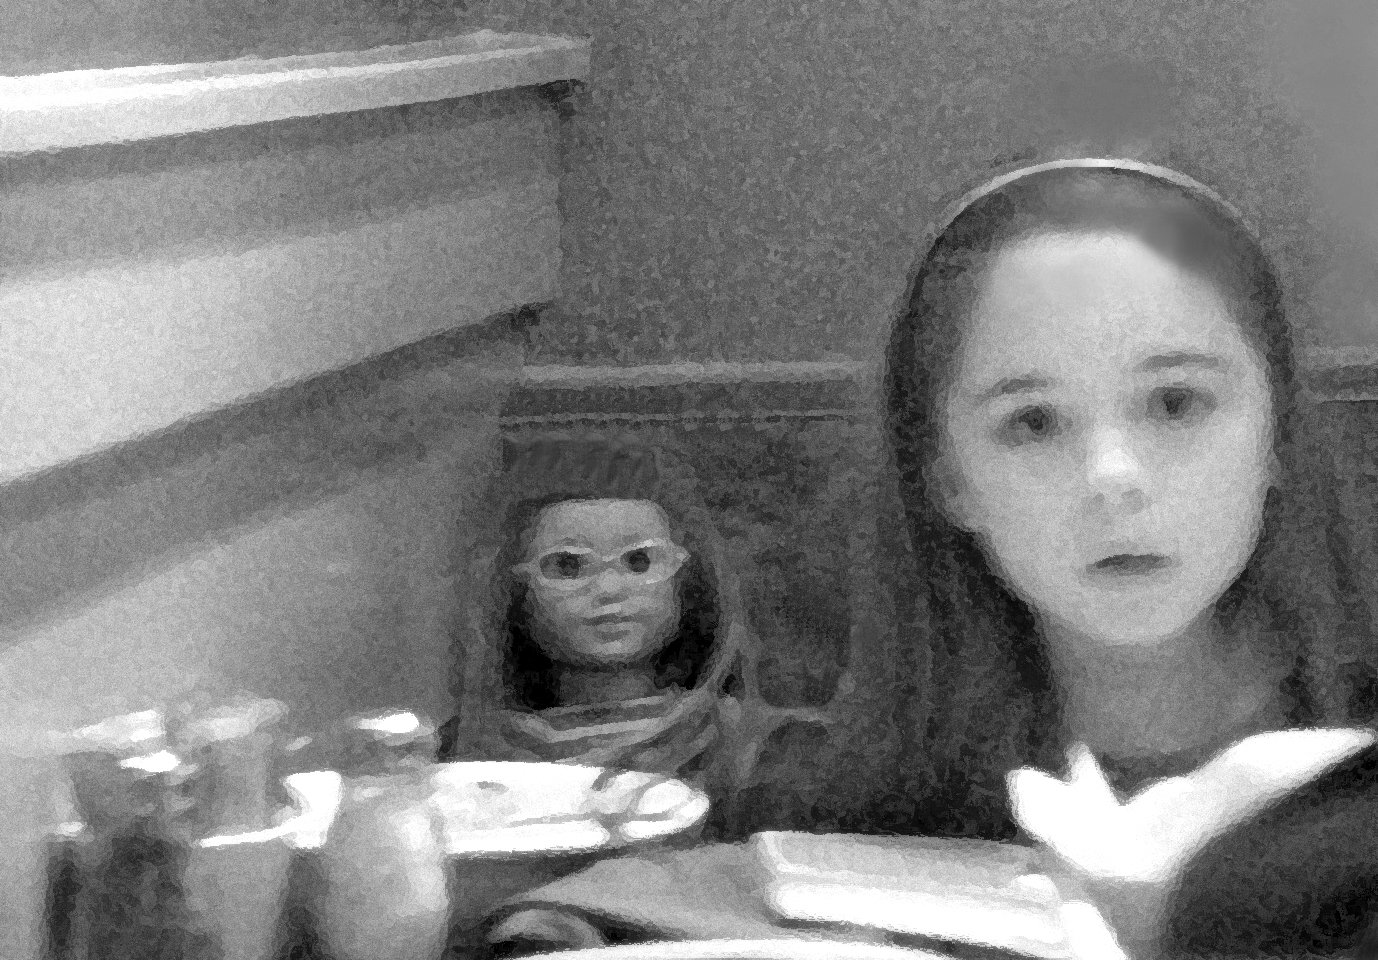 Girl and doll at Olive Garden-b&w.jpg